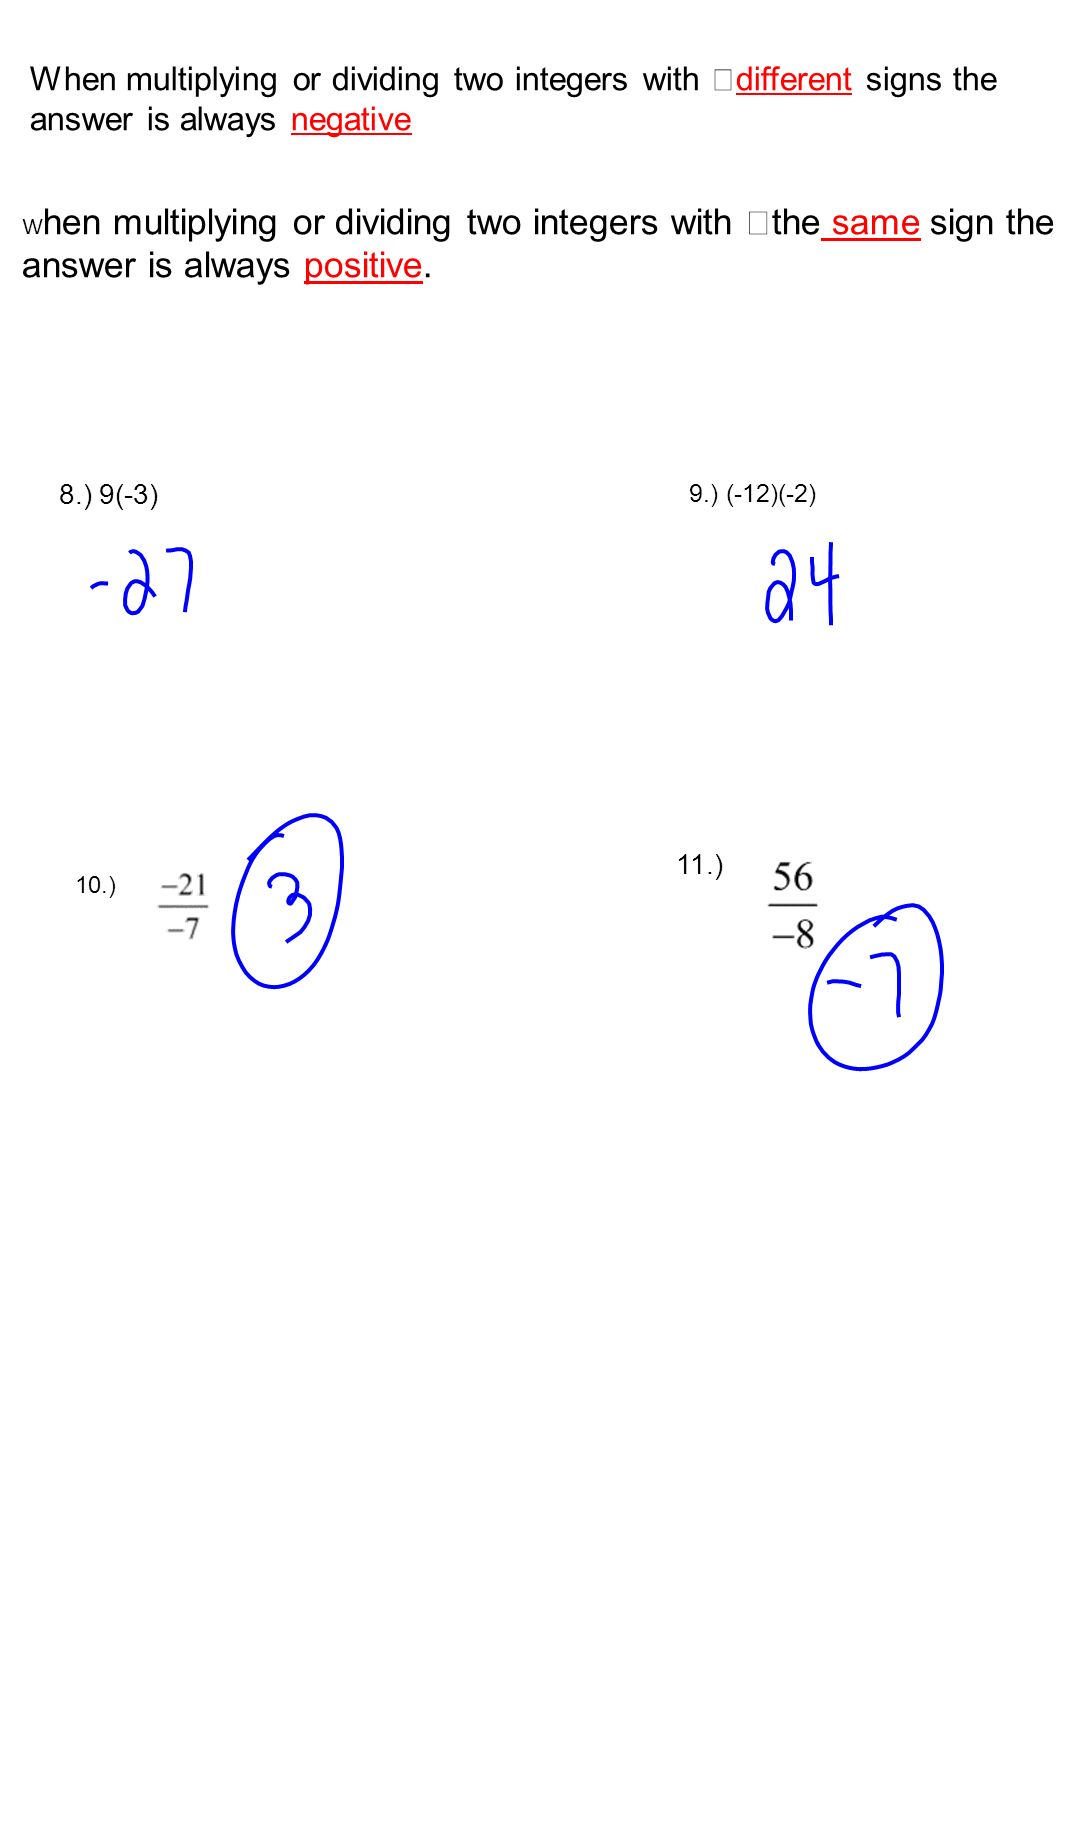 When multiplying or dividing two integers with different signs the answer is always negative W hen multiplying or dividing two integers with the same sign the answer is always positive.